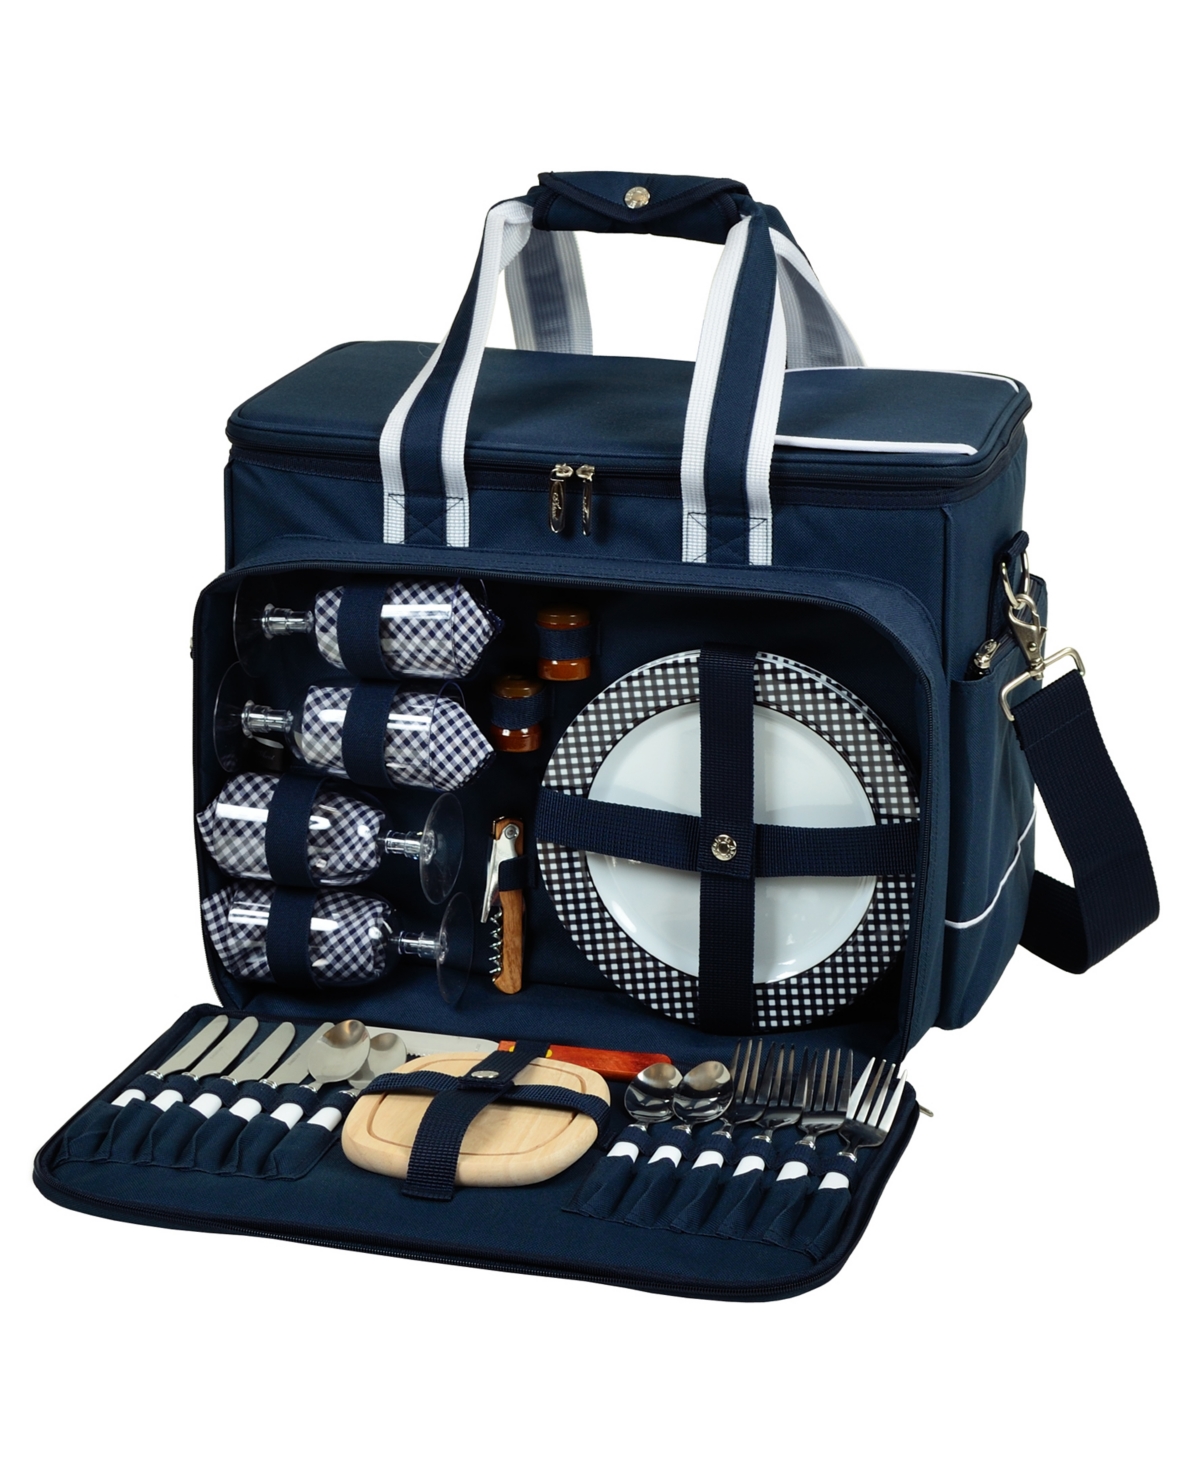 Ultimate Picnic Cooler Equipped for 4 with Accessories - Navy